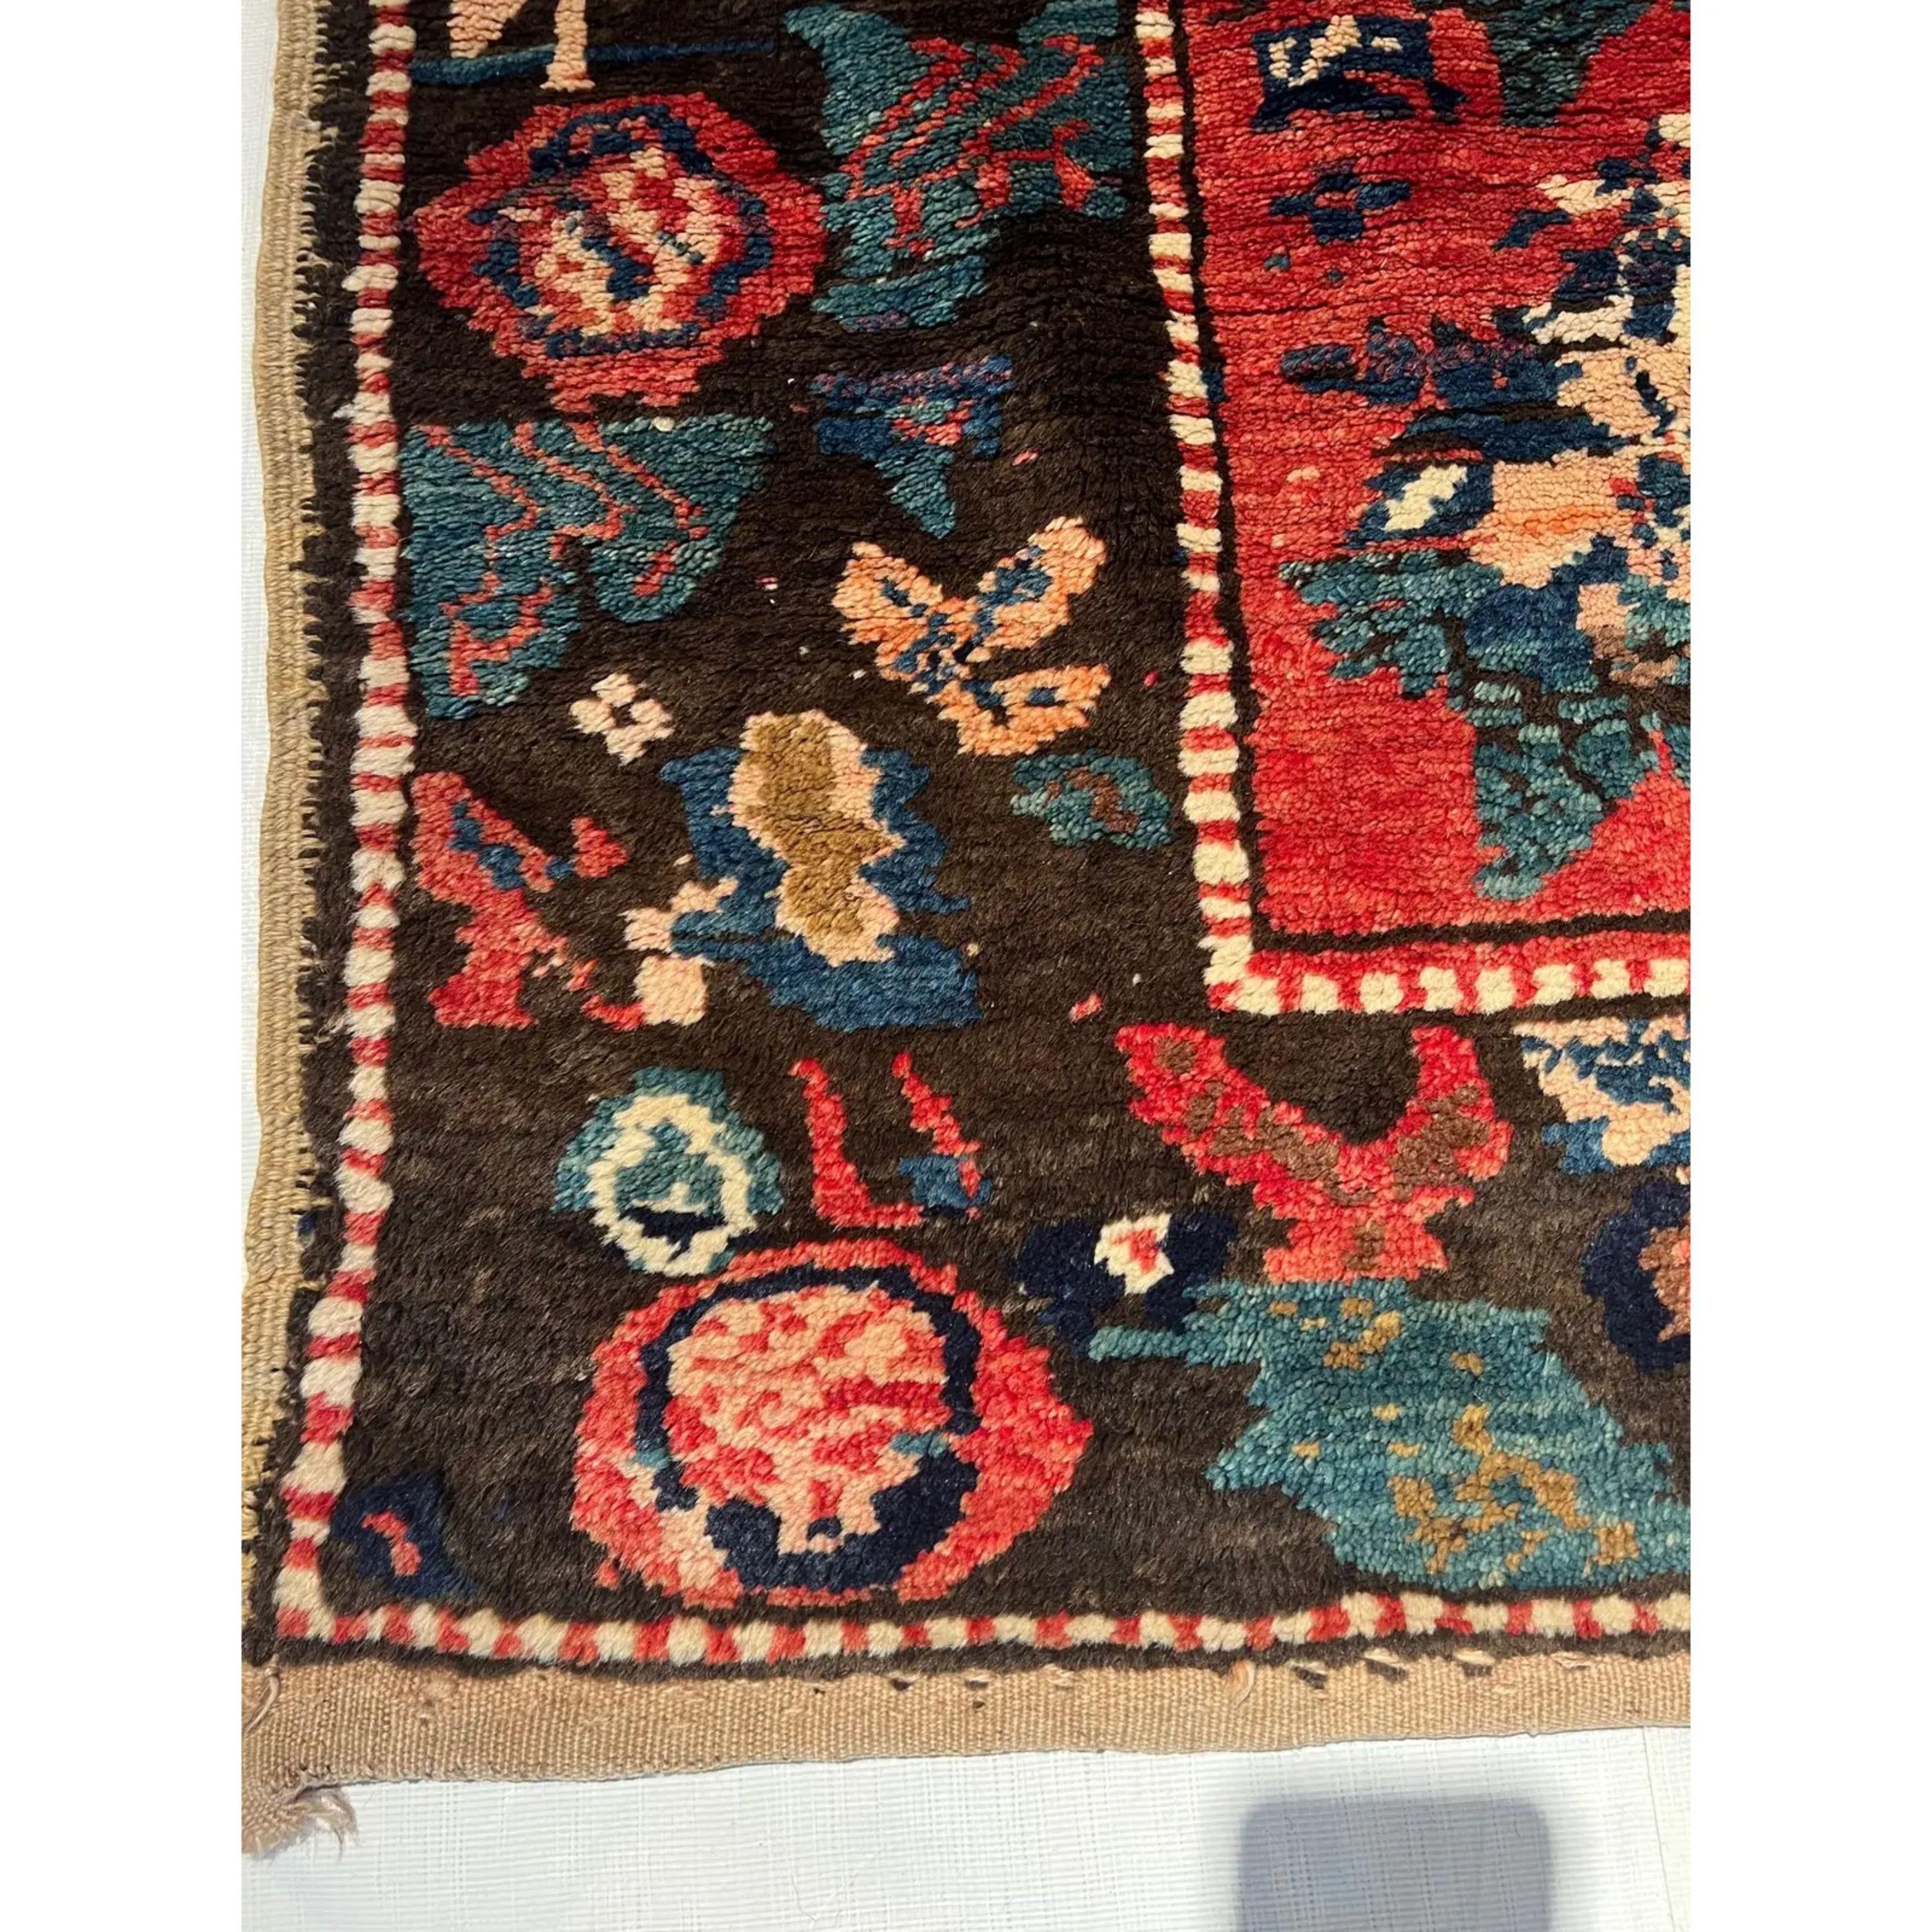 1900s Antique Karabagh Rug 7.7x3.11 In Good Condition For Sale In Los Angeles, US